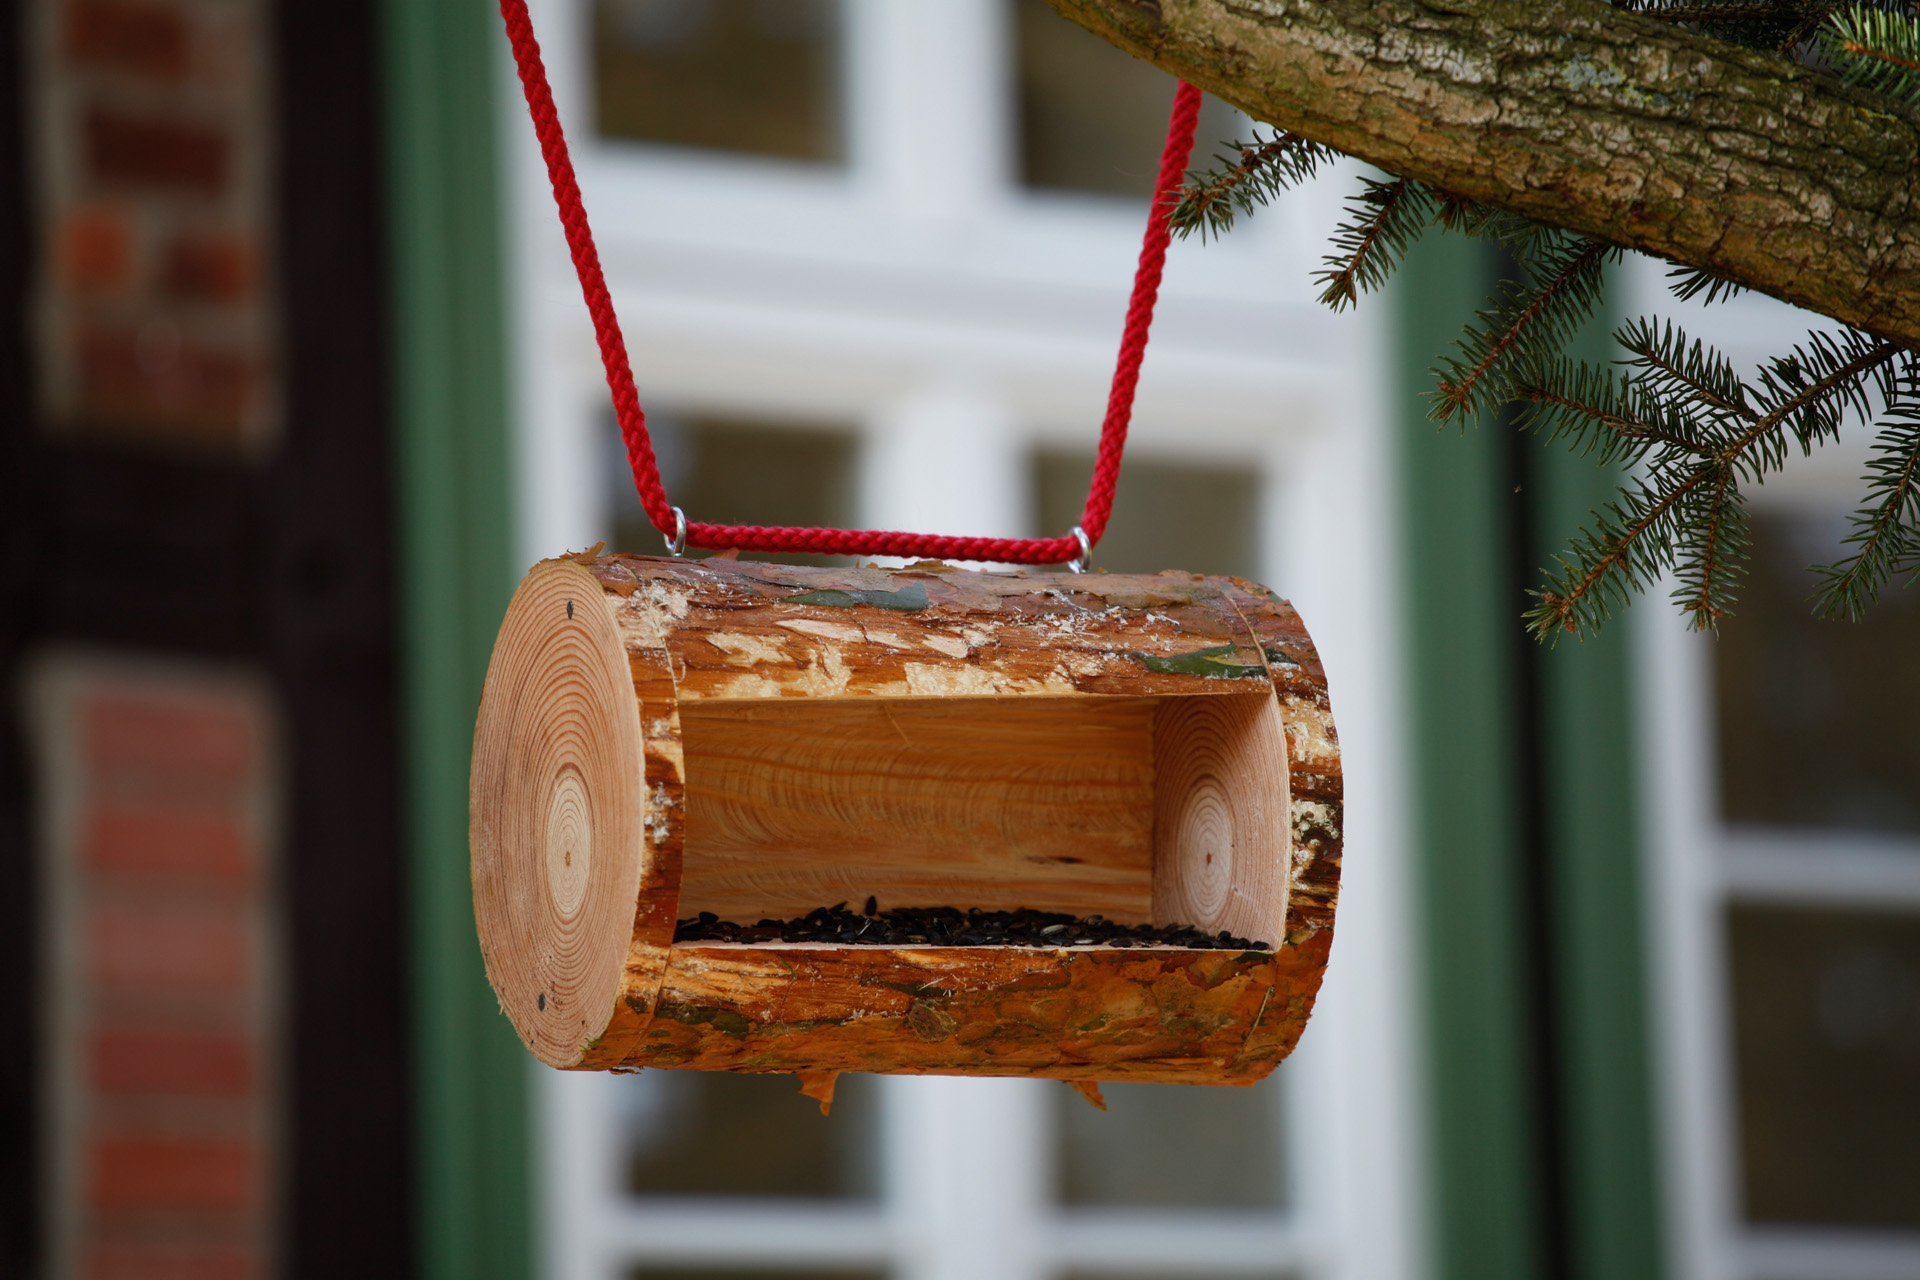 A finished DIY bird feeder hanging from a branch by a piece of red cord